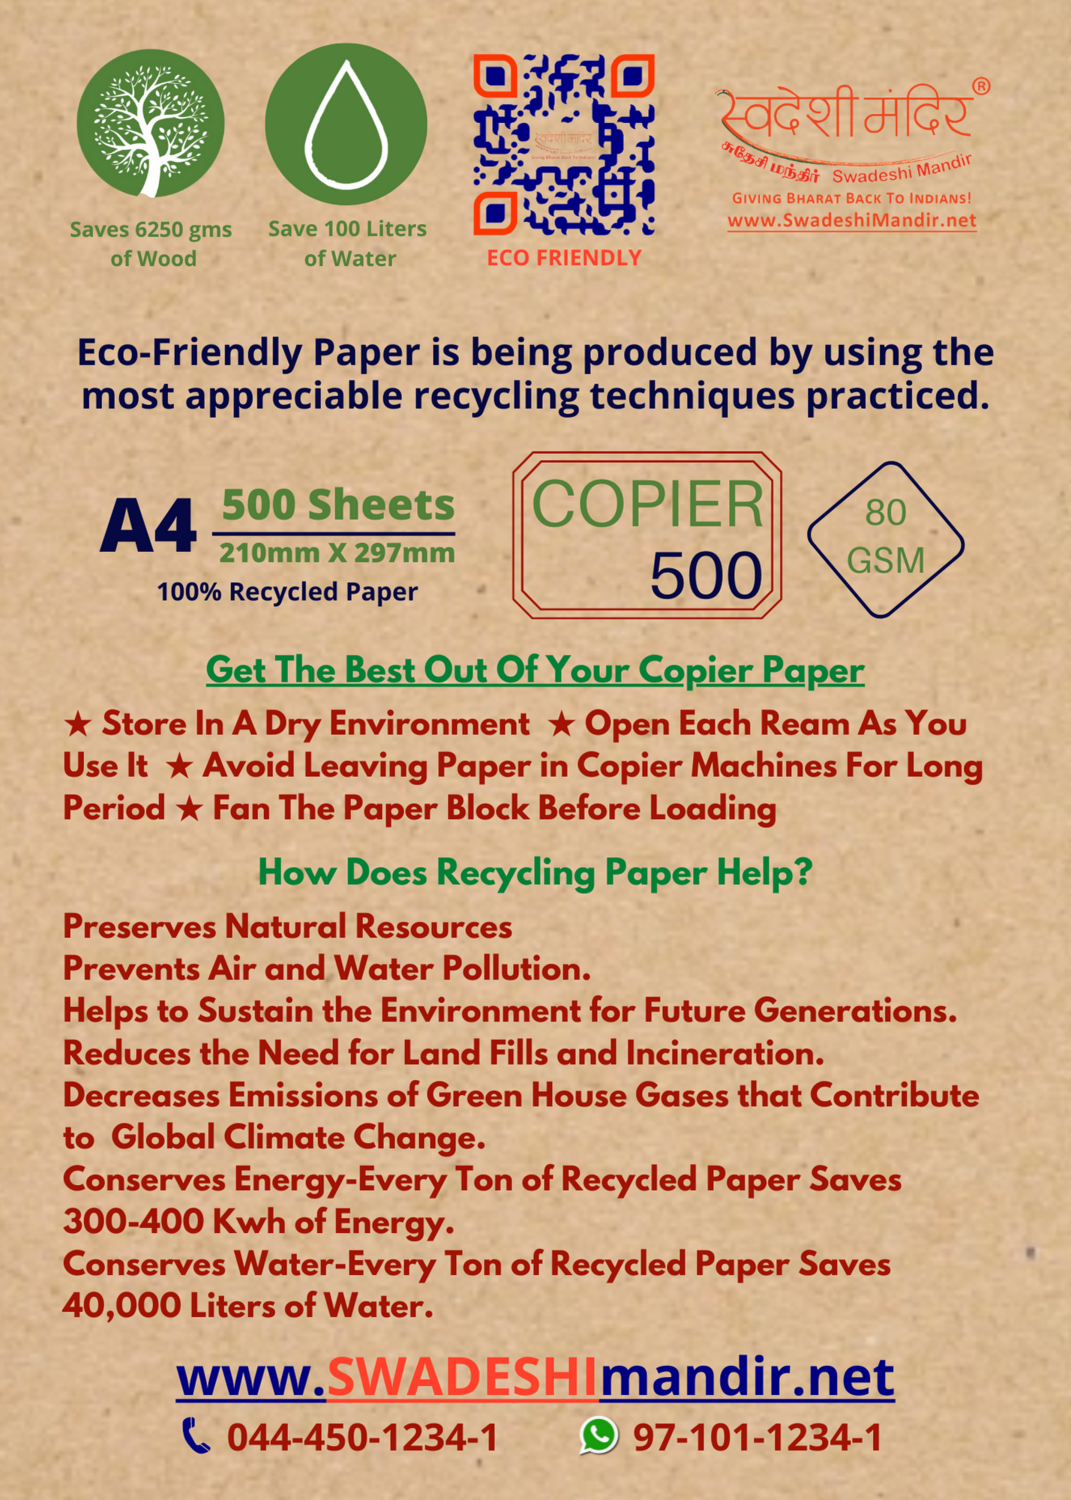 100% Recycled Copier Paper 
(Unbleached & Eco-friendly) 
A4, A5 Sizes (Brownish color) & A4 (Whitish Color)